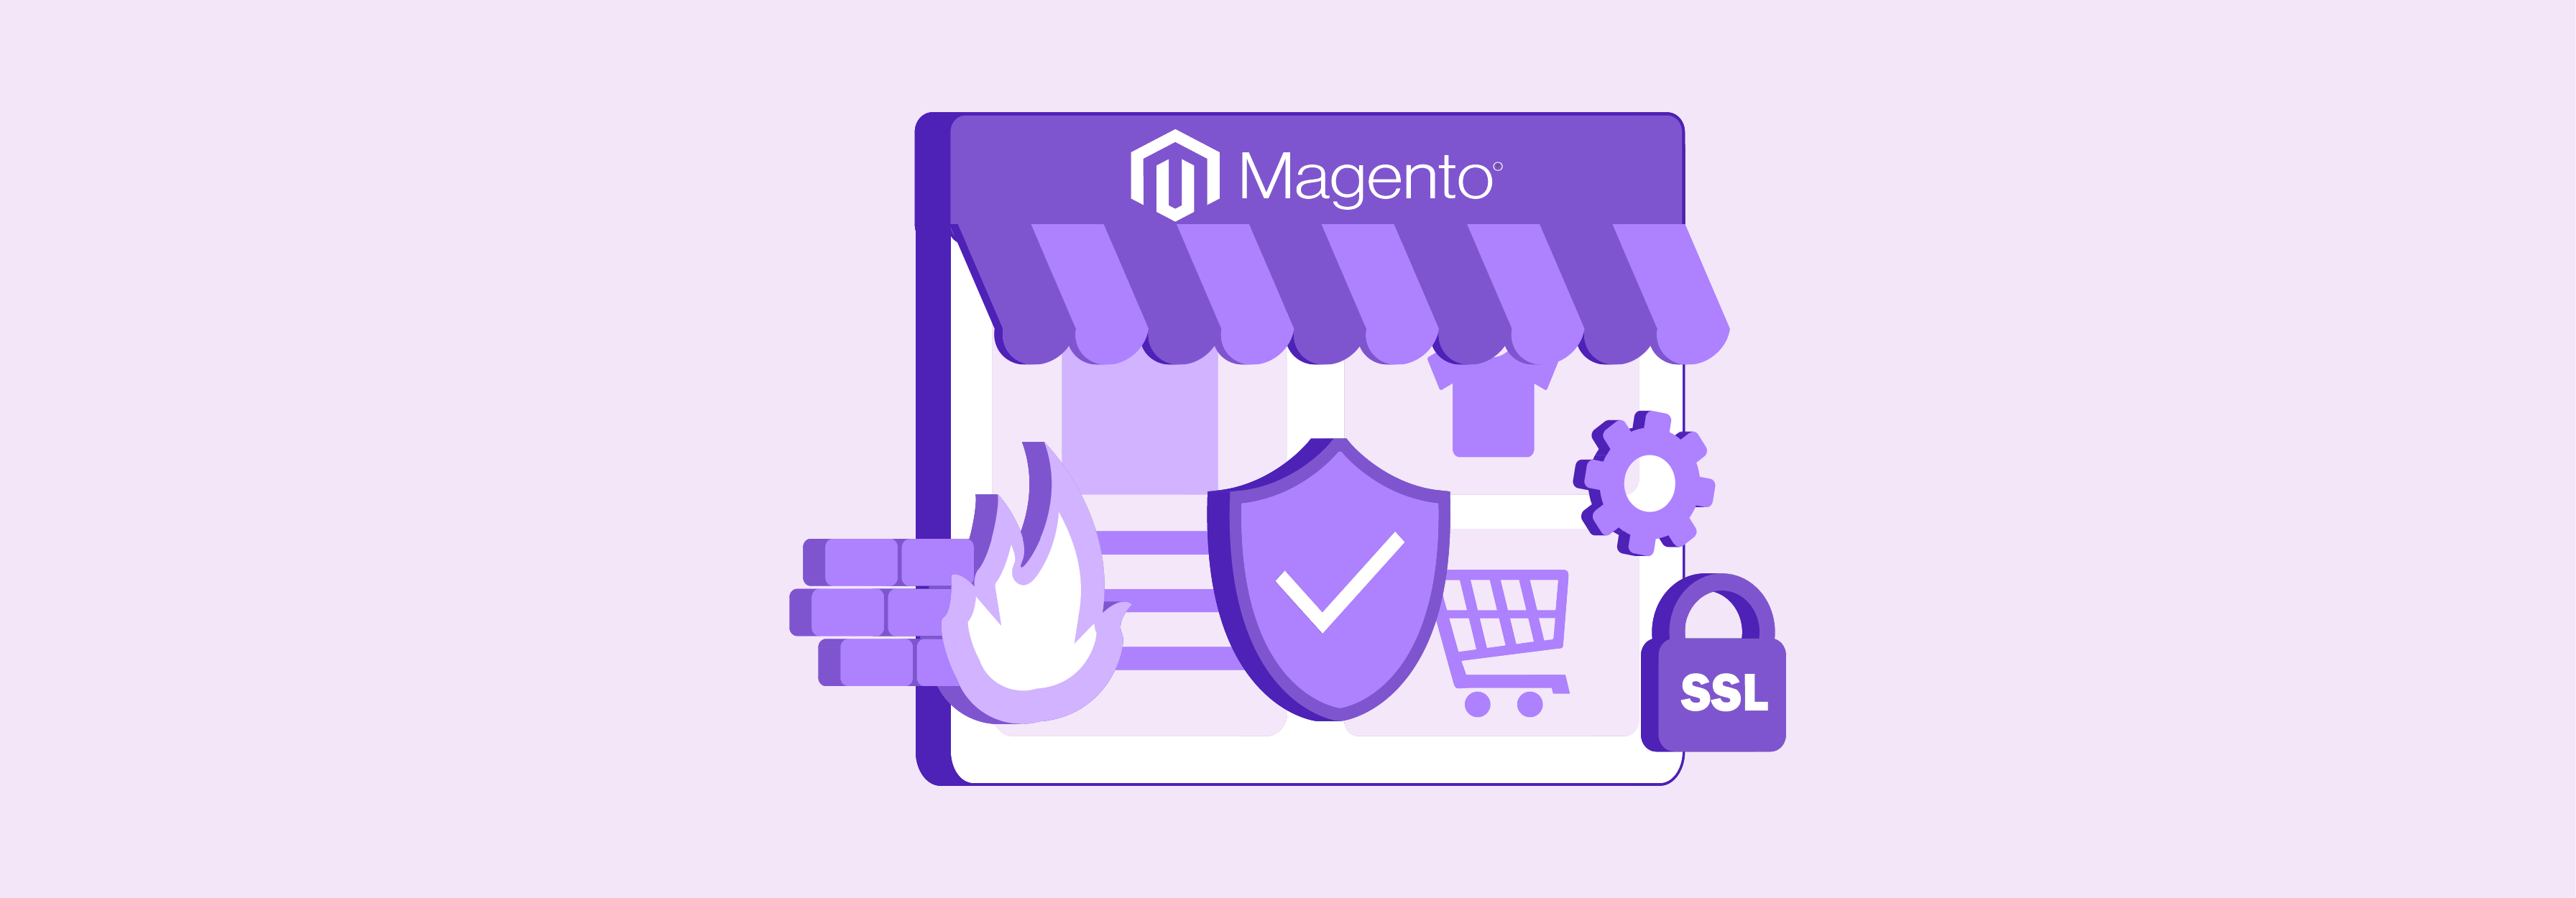 Key security considerations for Magento hosting solutions